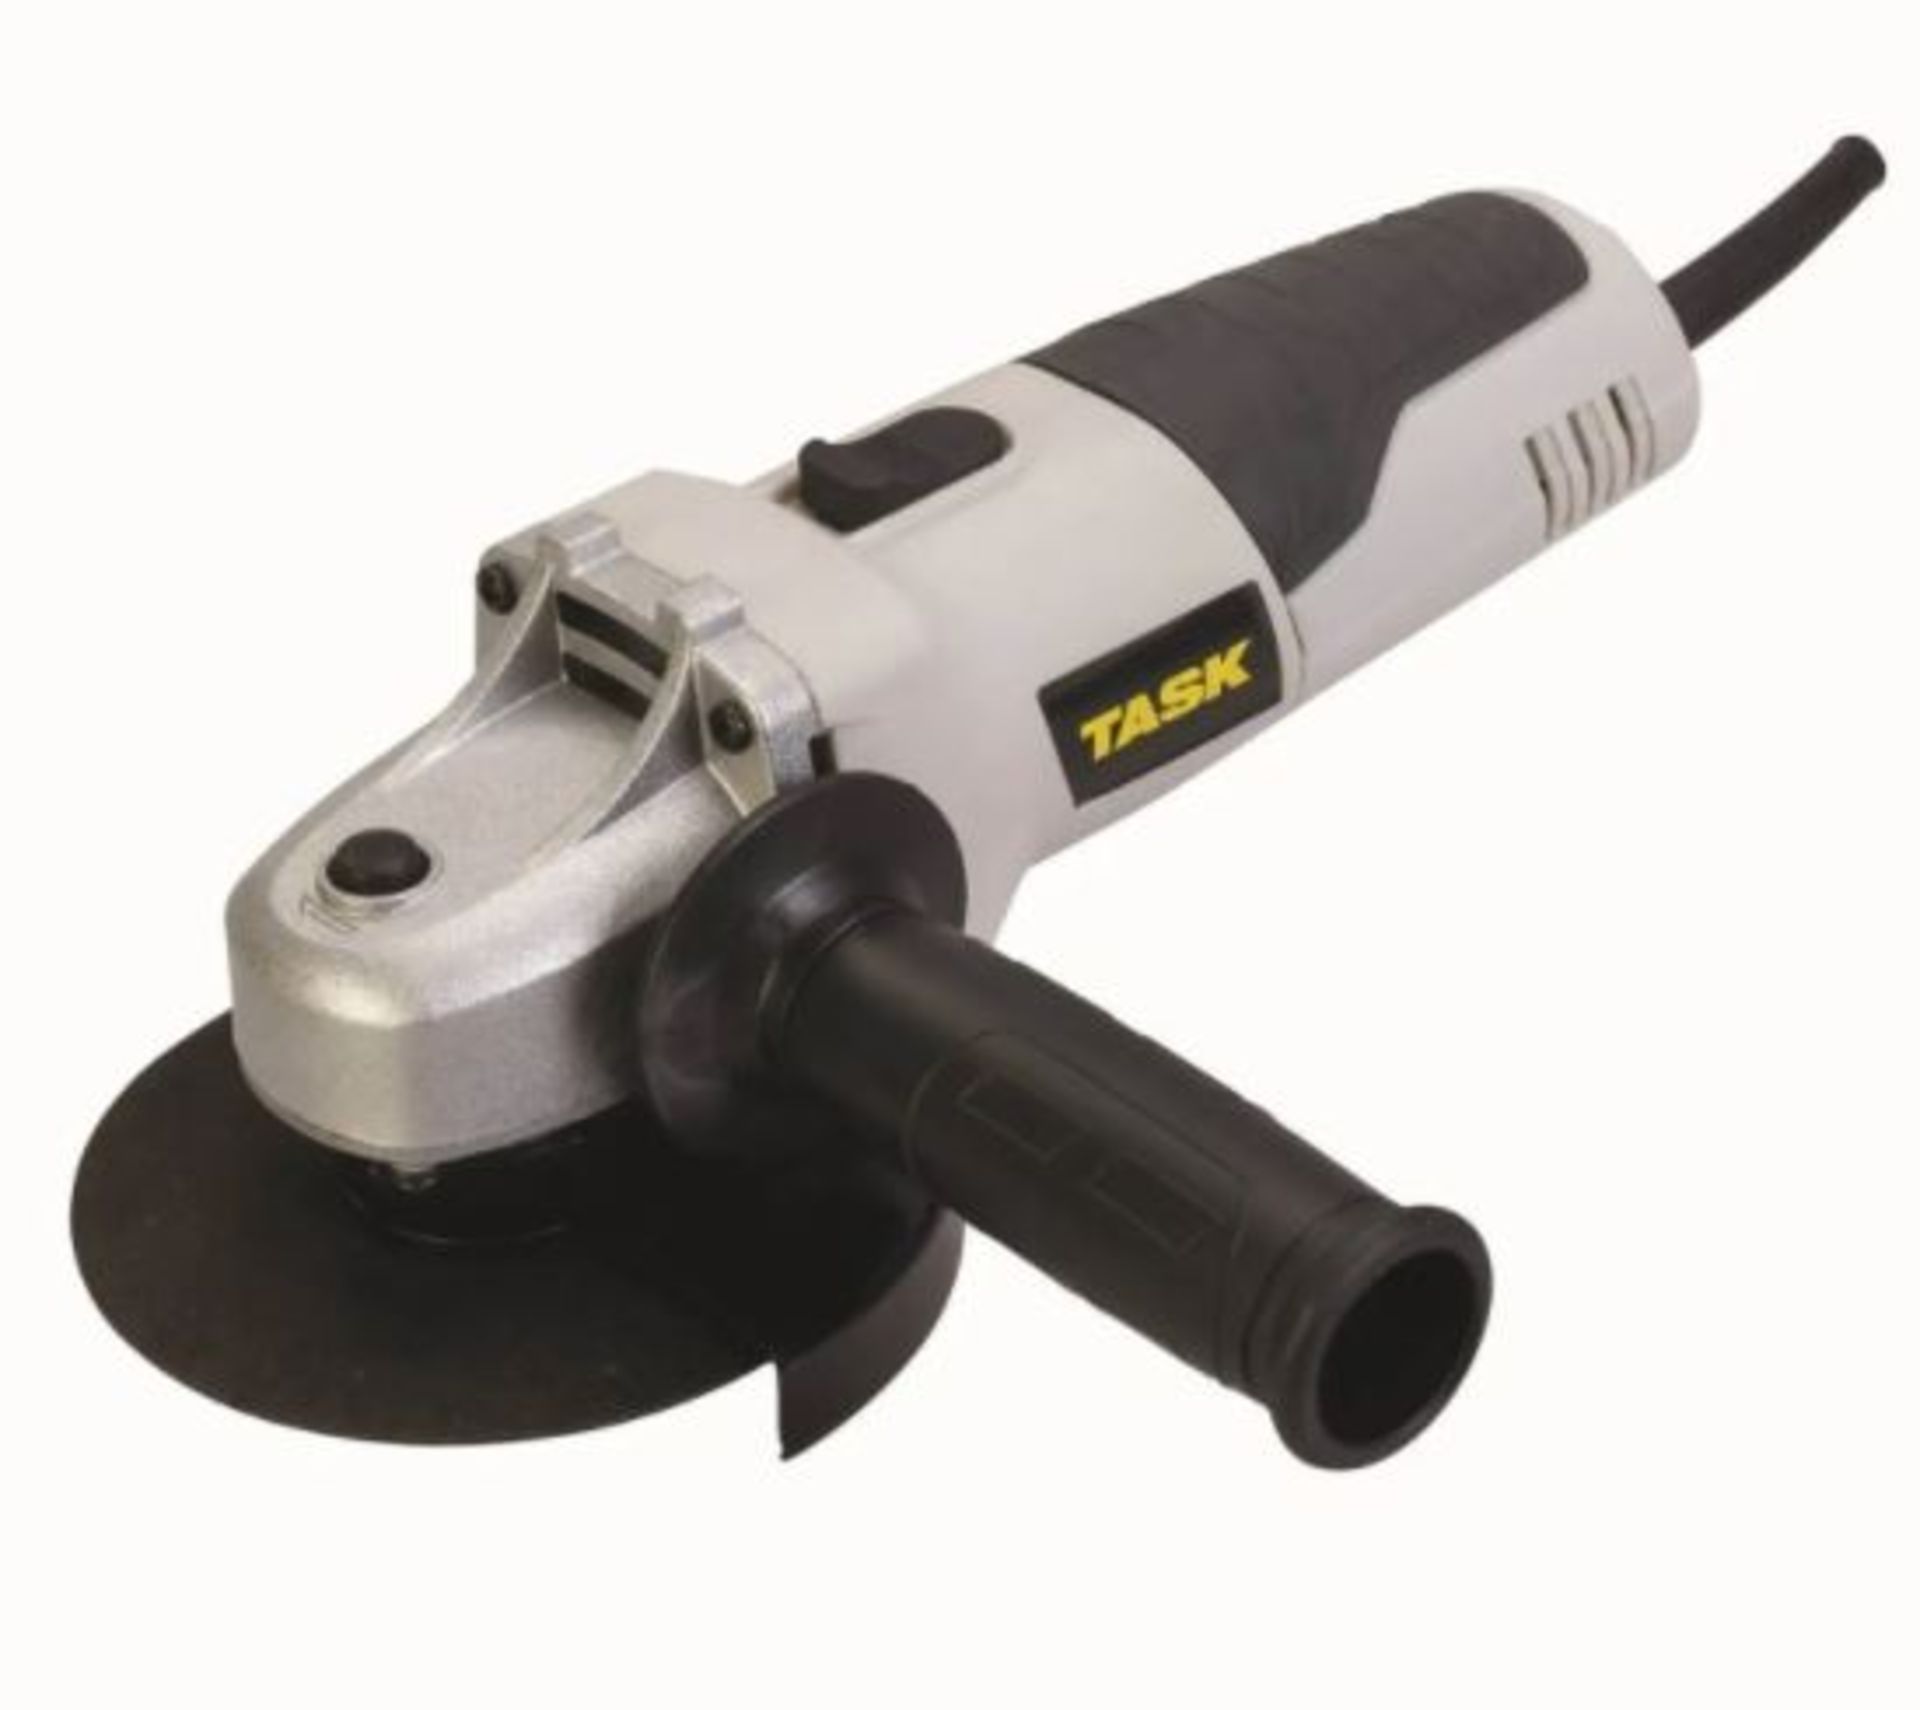 (R15H) 4 Items. 2 X Task 500W Angle Grinder 115mm, 1 X AP Pro Series Rechargeable 350 Lumens Spotli